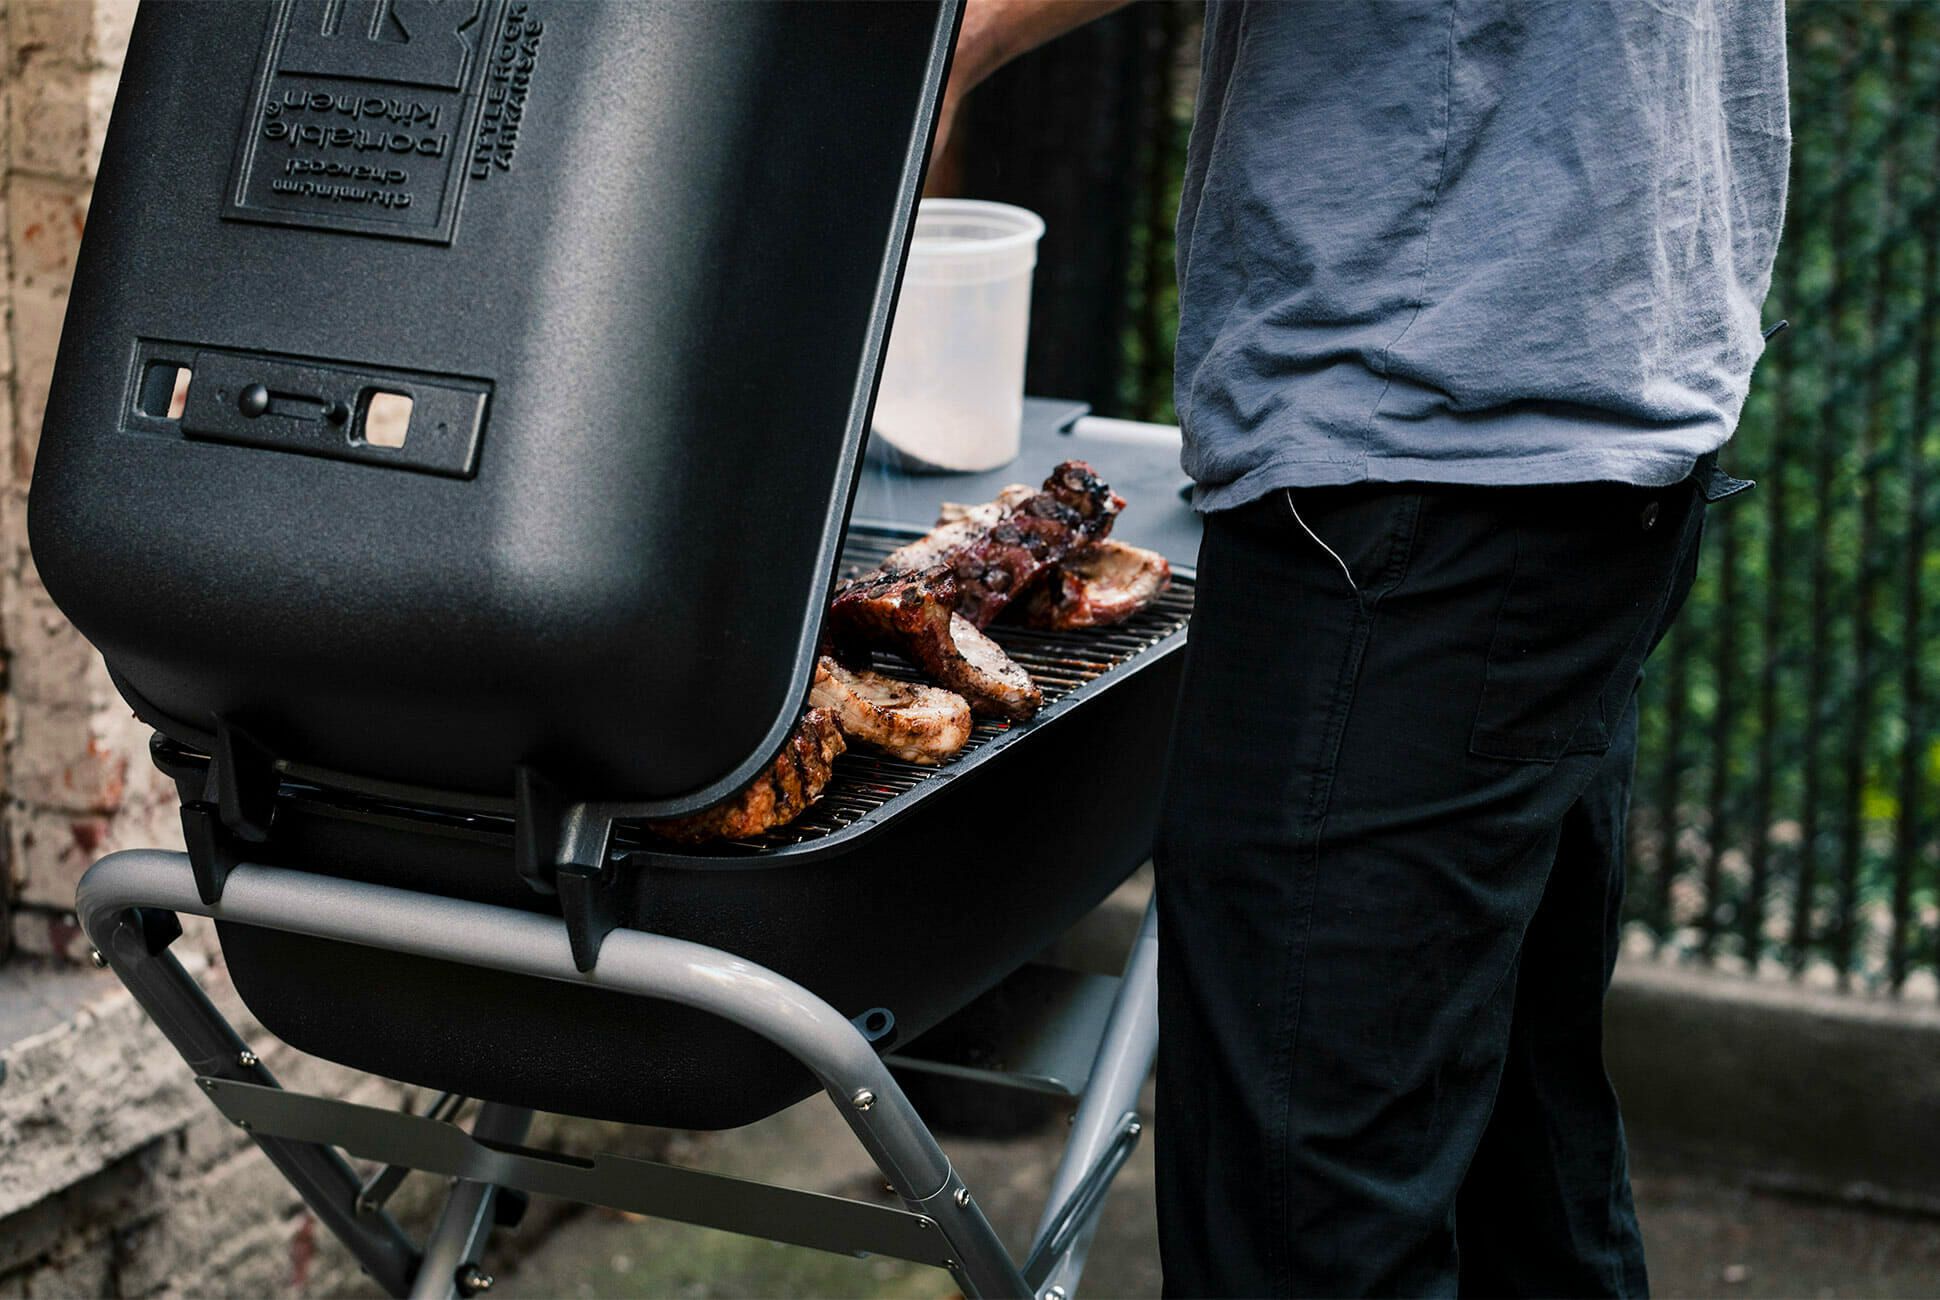 Should You Use Your Grill's Built-in Thermometer? : BBQGuys